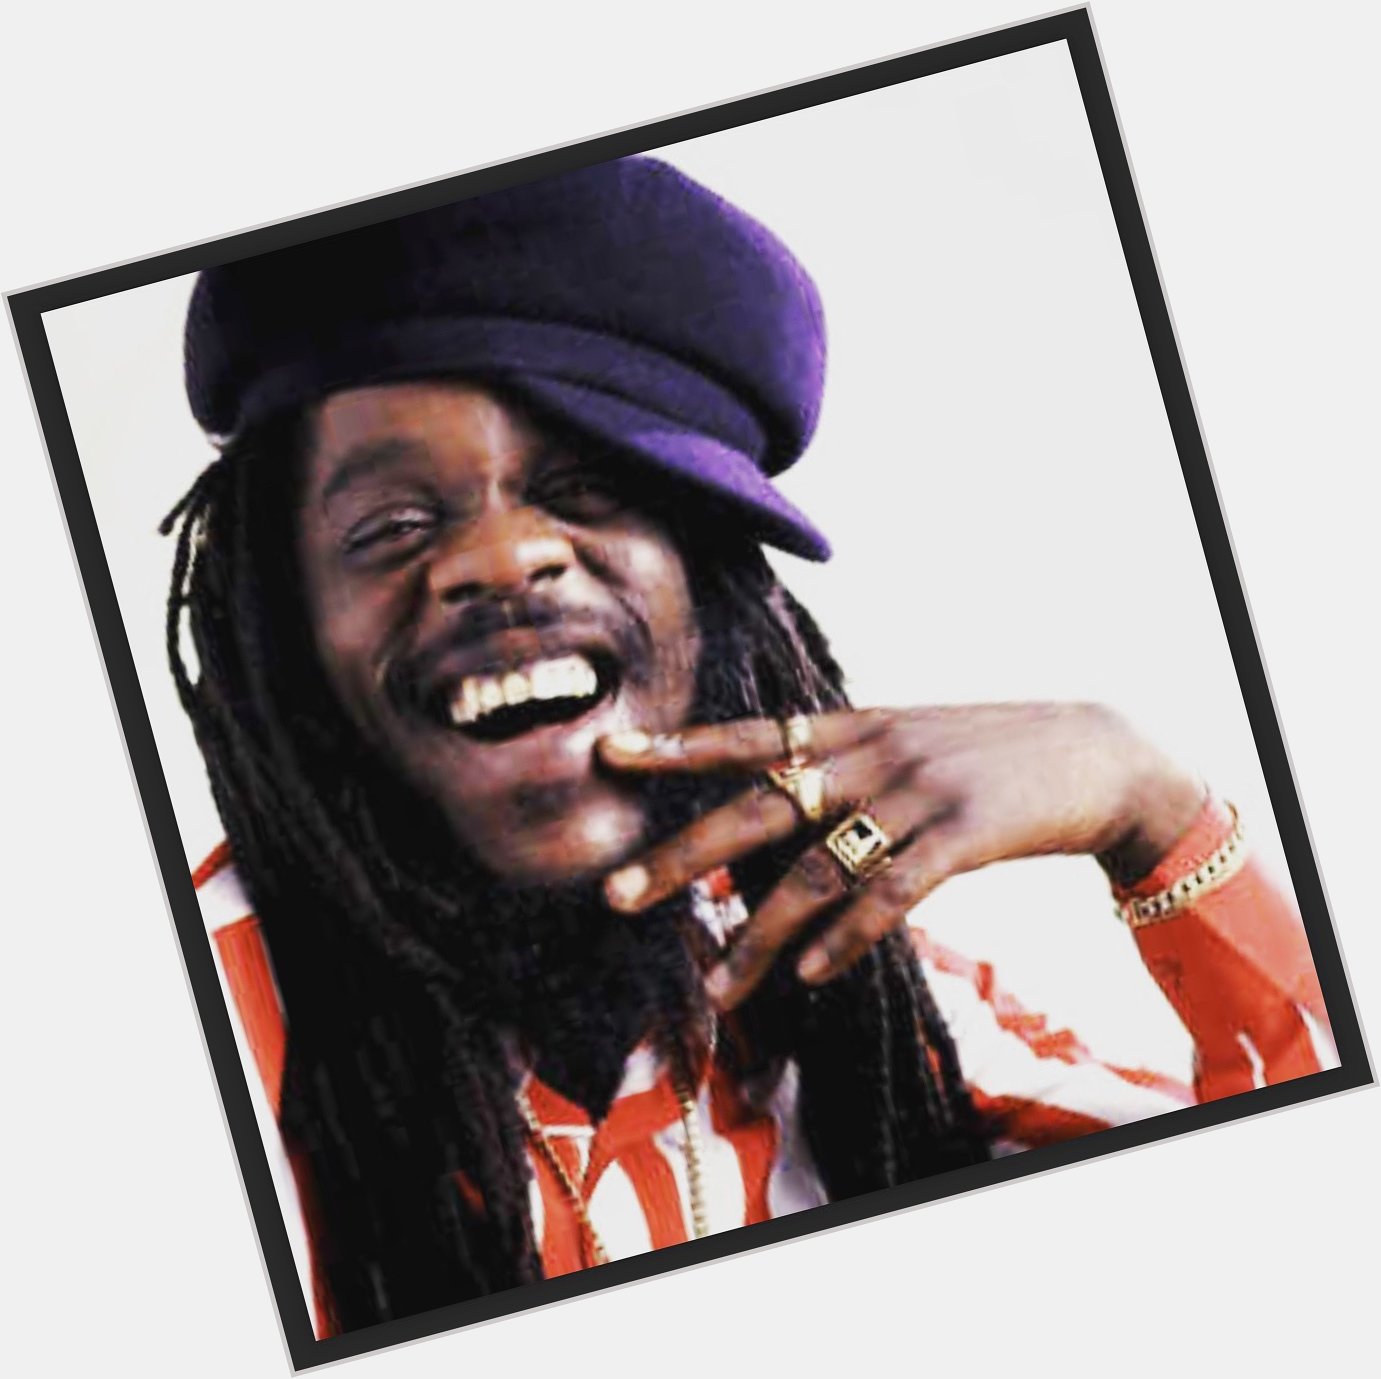 Happy earthstrong to crown prince of reggae Dennis Brown   